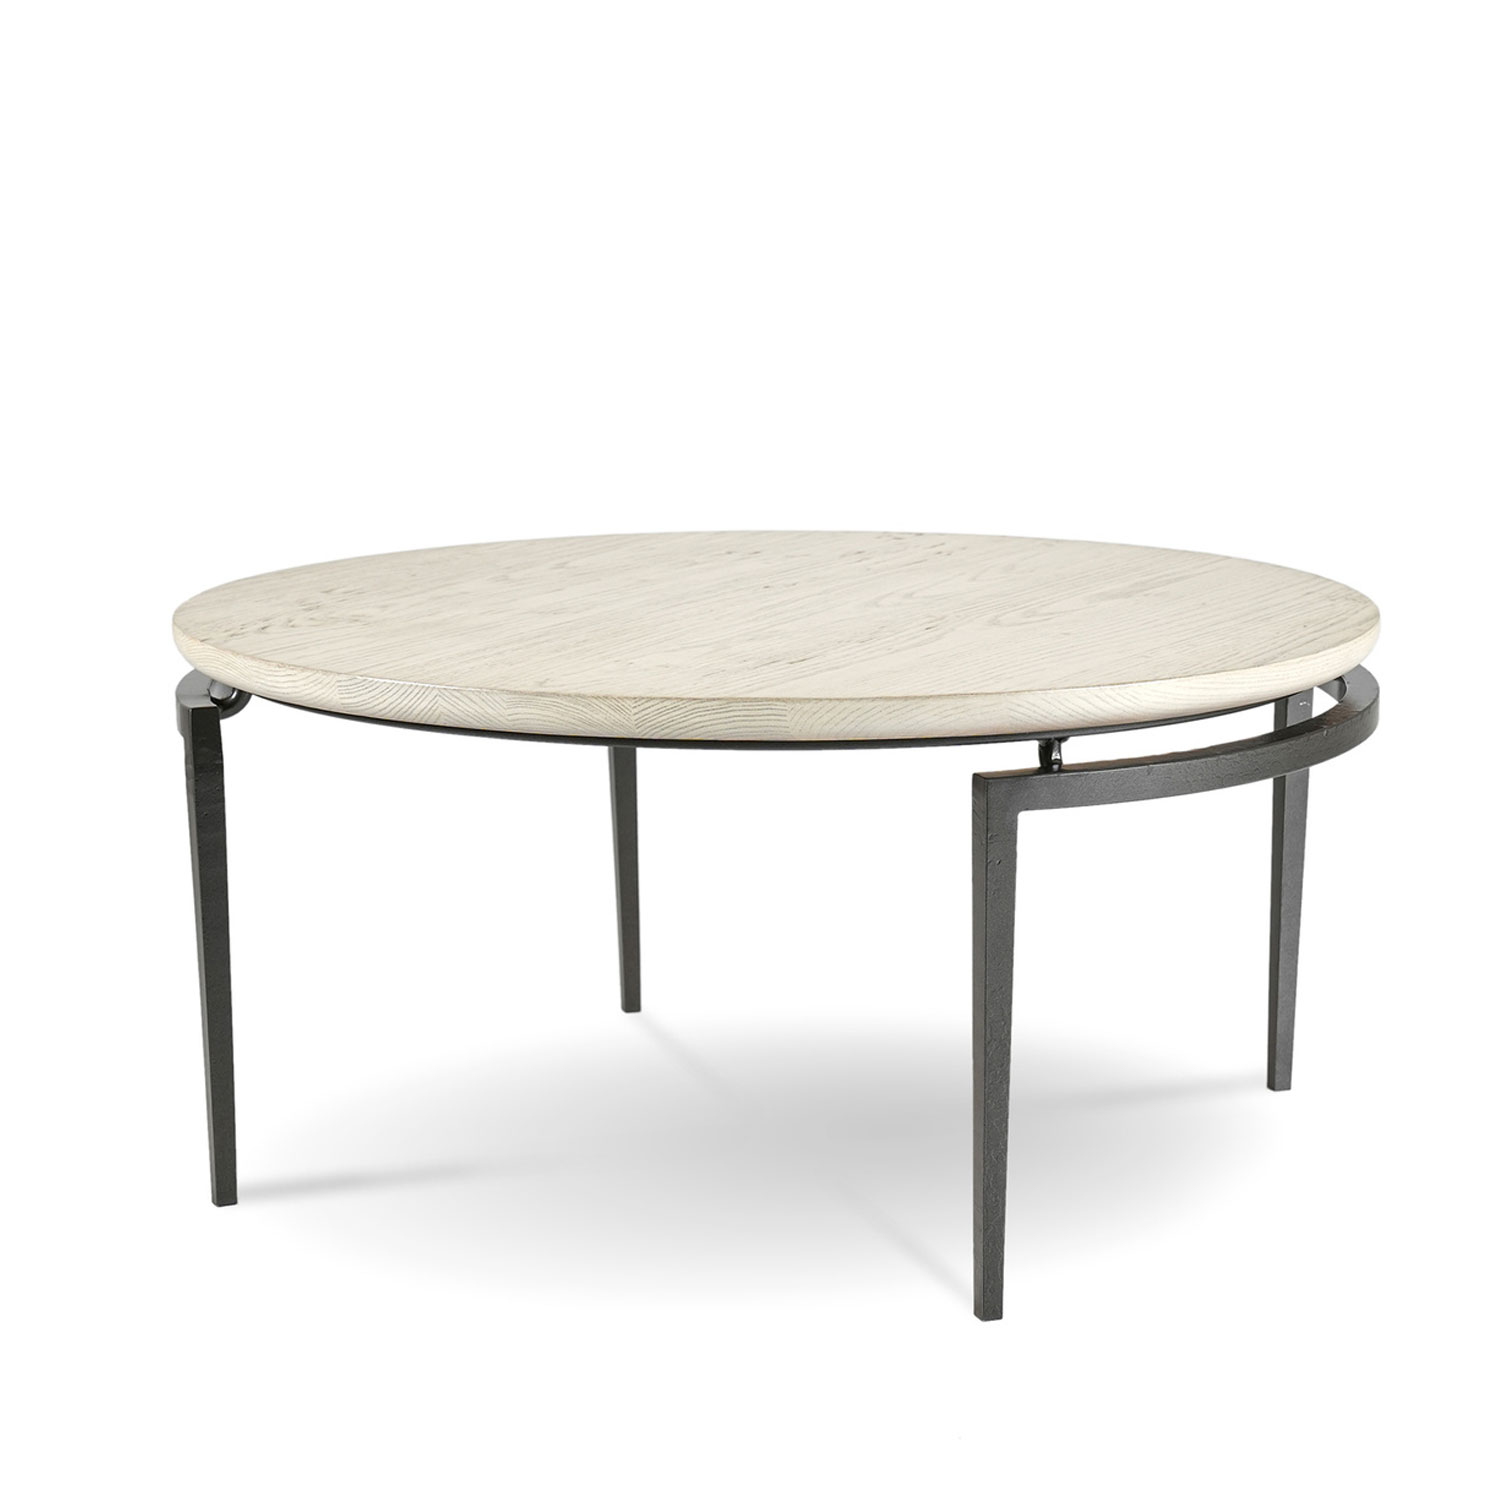 Charleston Forge Armory 36 inch Round Cocktail Table